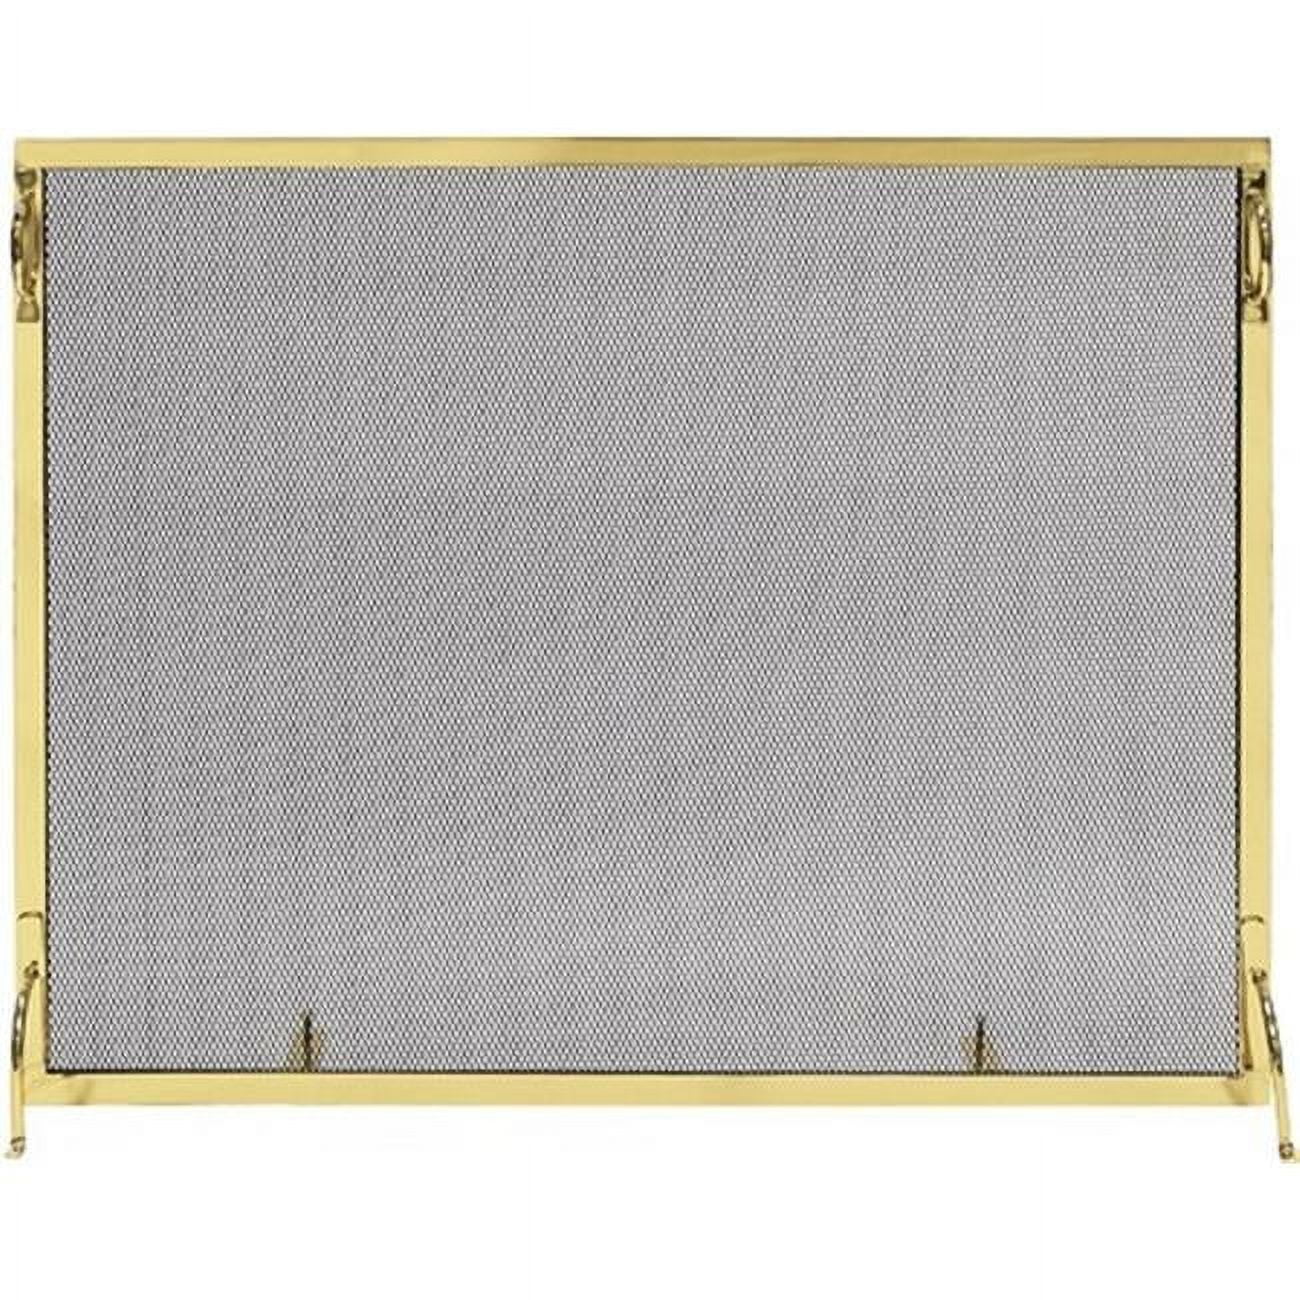 Picture of Achla SSM-5036BR 36 x 50 in. Montreal Screen, Polished Brass